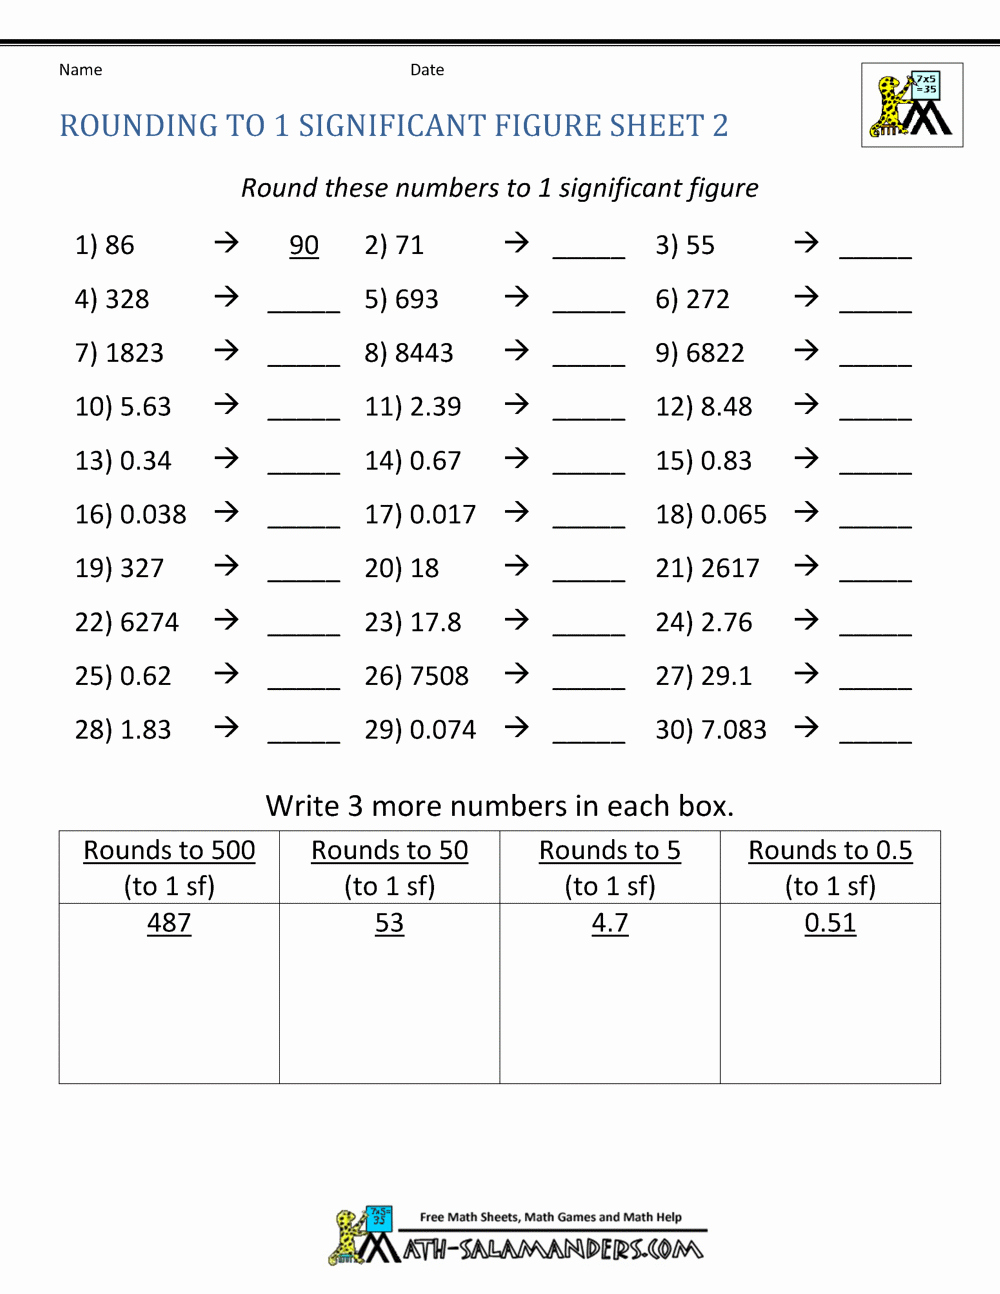 Sig Figs Worksheet with Answers Elegant Rounding Significant Figures